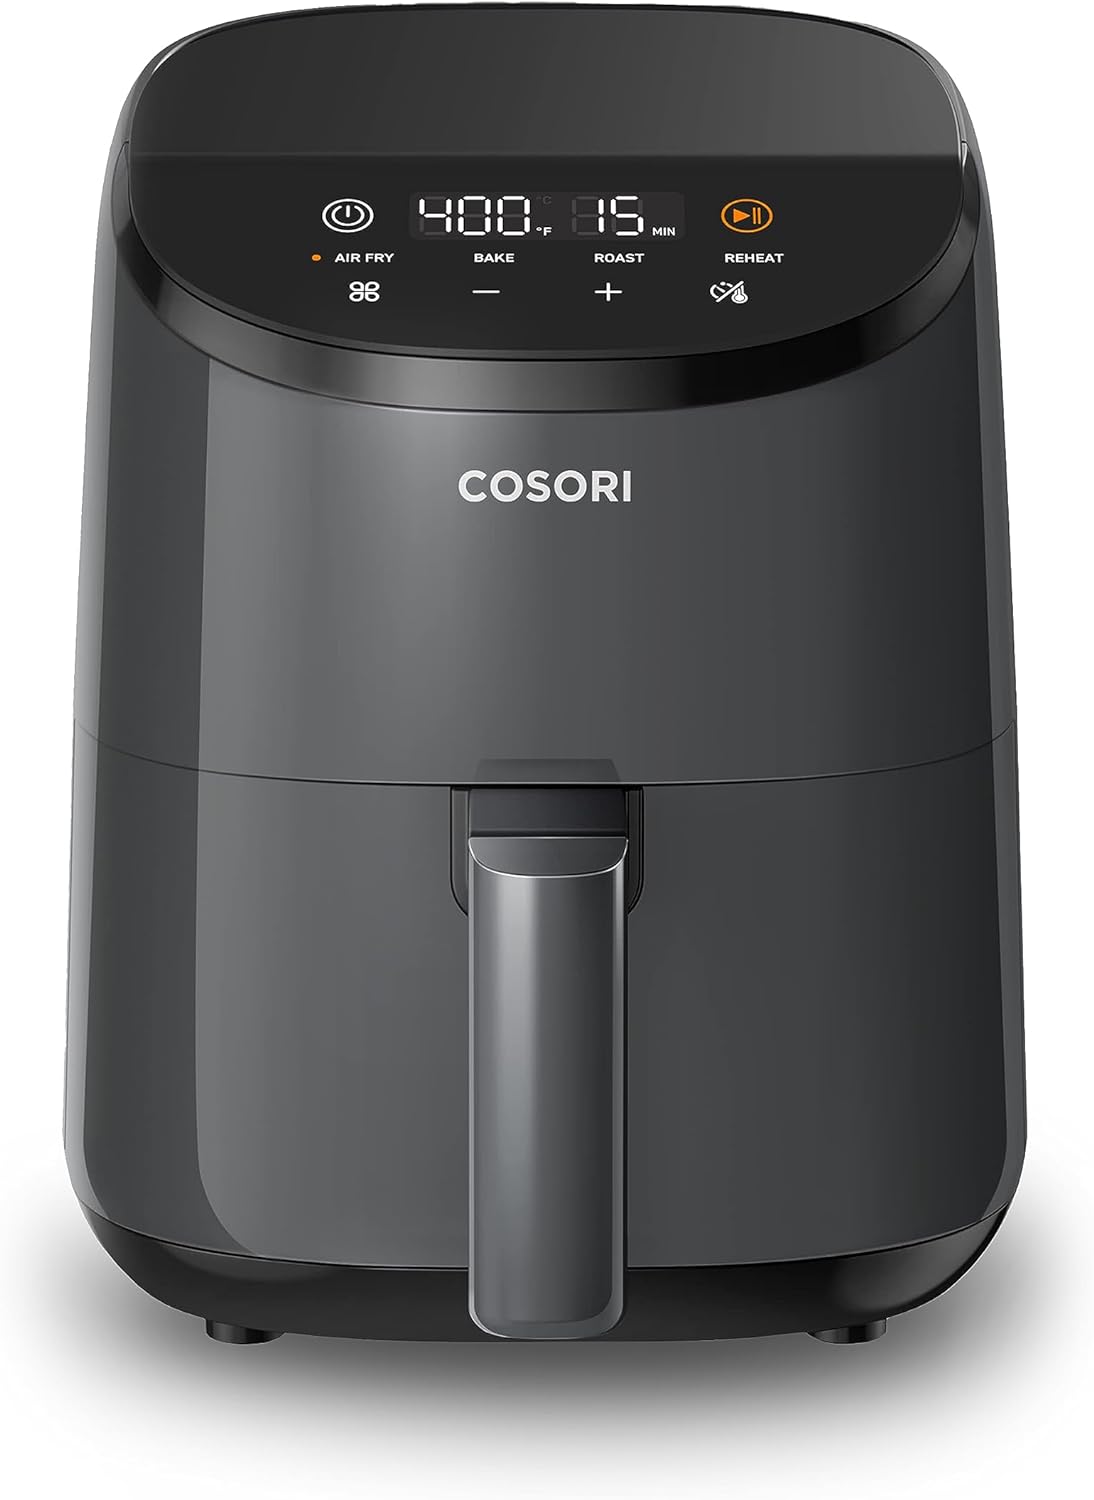 COSORI Small Air Fryer Oven 2.1 Qt, 4-in-1 Mini Airfryer